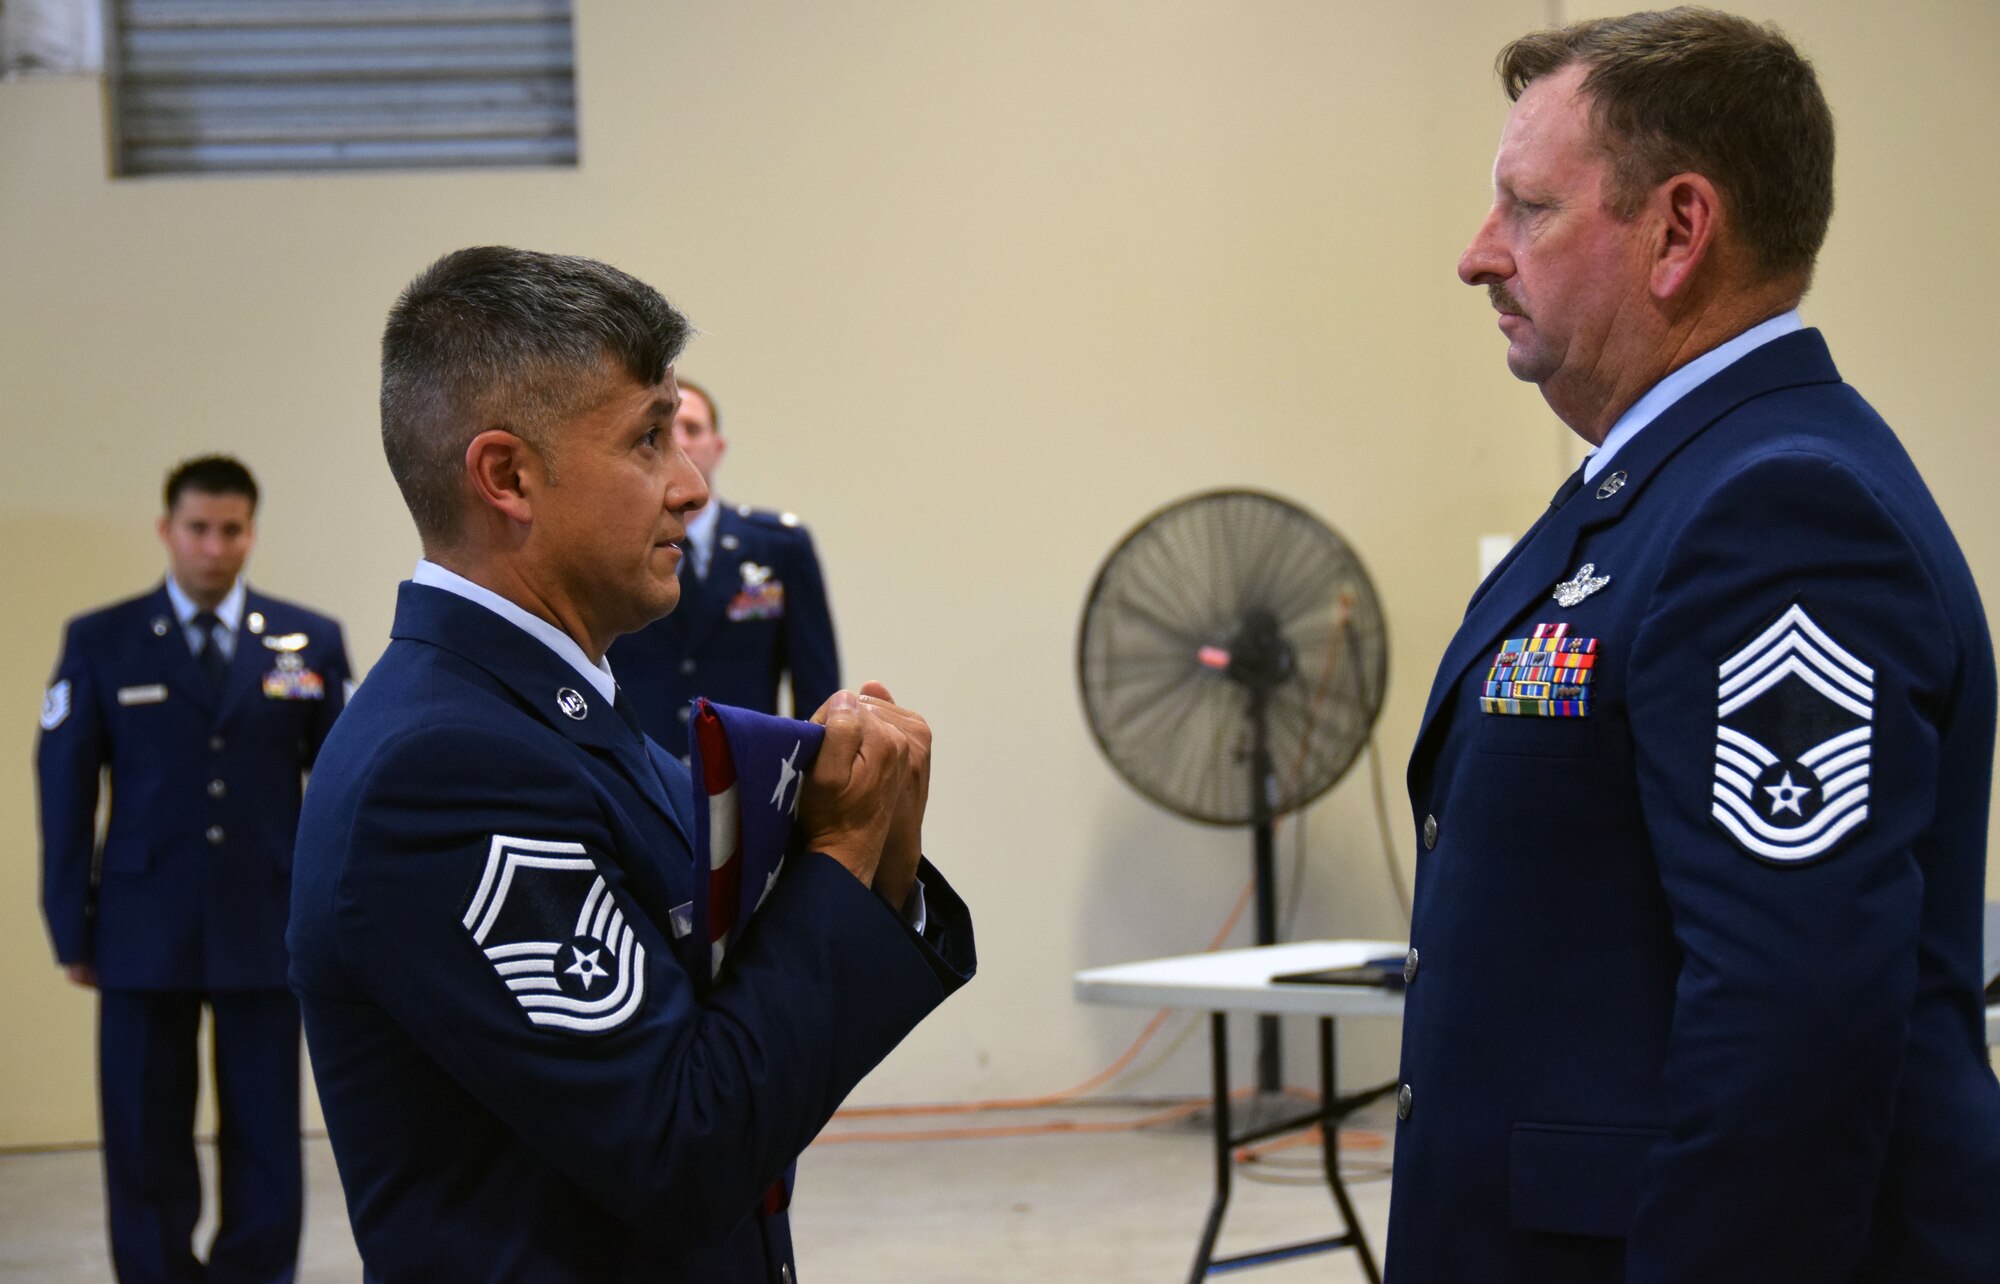 Senior Master Sgt. Miguel Casso, 356th Airlift Squadron loadmaster instructor, presents a United States flag to Chief Master Sgt. Thomas J. Veilleux Sr., 356th Airlift Squadron’s Formal Training Unit superintendent, during the chief’s retirement ceremony at the Cargo Loading Training Facility at Joint Base San Antonio-Lackland, Texas June 11, 2017.  The chief’s career, which spanned over 34 years, began in  August 1979 in Security Forces as a dog handler. (U.S. Air Force photo by Tech. Sgt. Carlos J. Trevino)